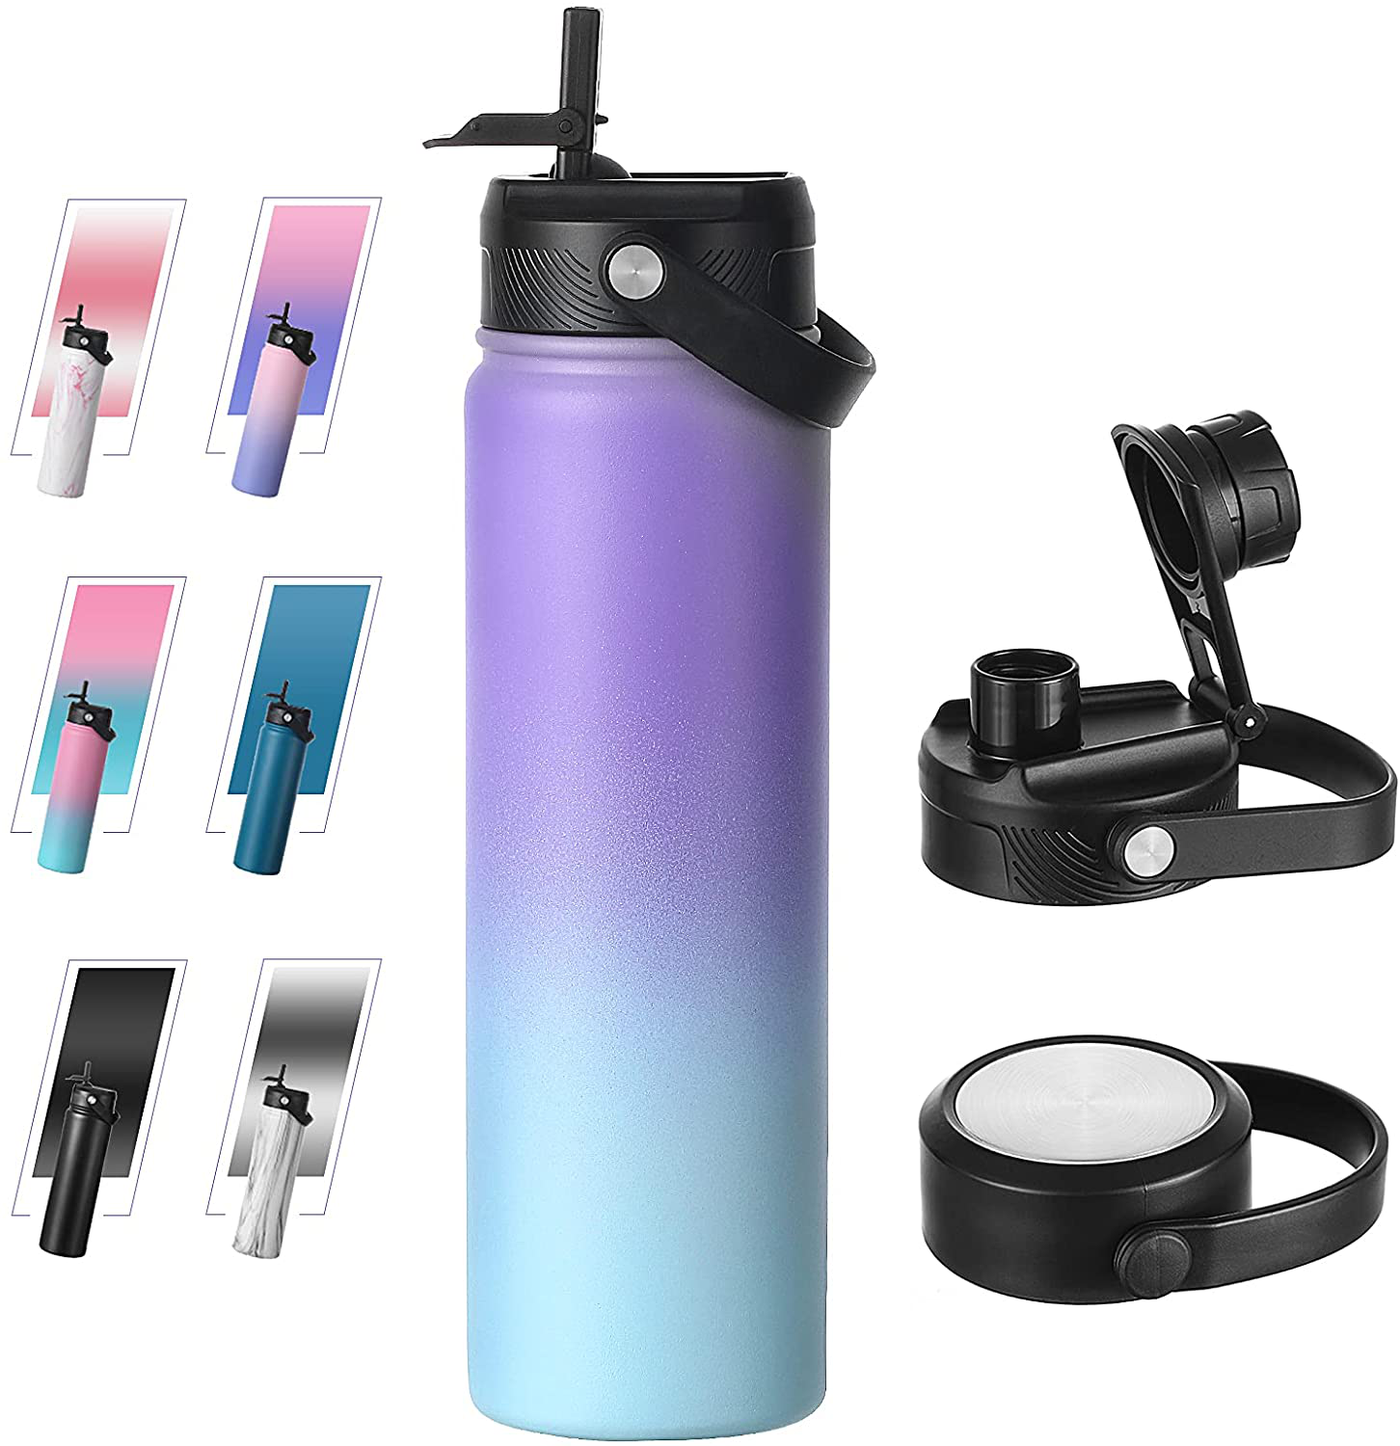 Bluego 32oz Stainless Steel Water Bottle with 3 Lids -Straw-Spout-Handle Lids, Vacuum Wide Mouth Reusable Metal Water Bottles,Keeps Hot and Cold Leak-Proof Sports Flask-PinkBule